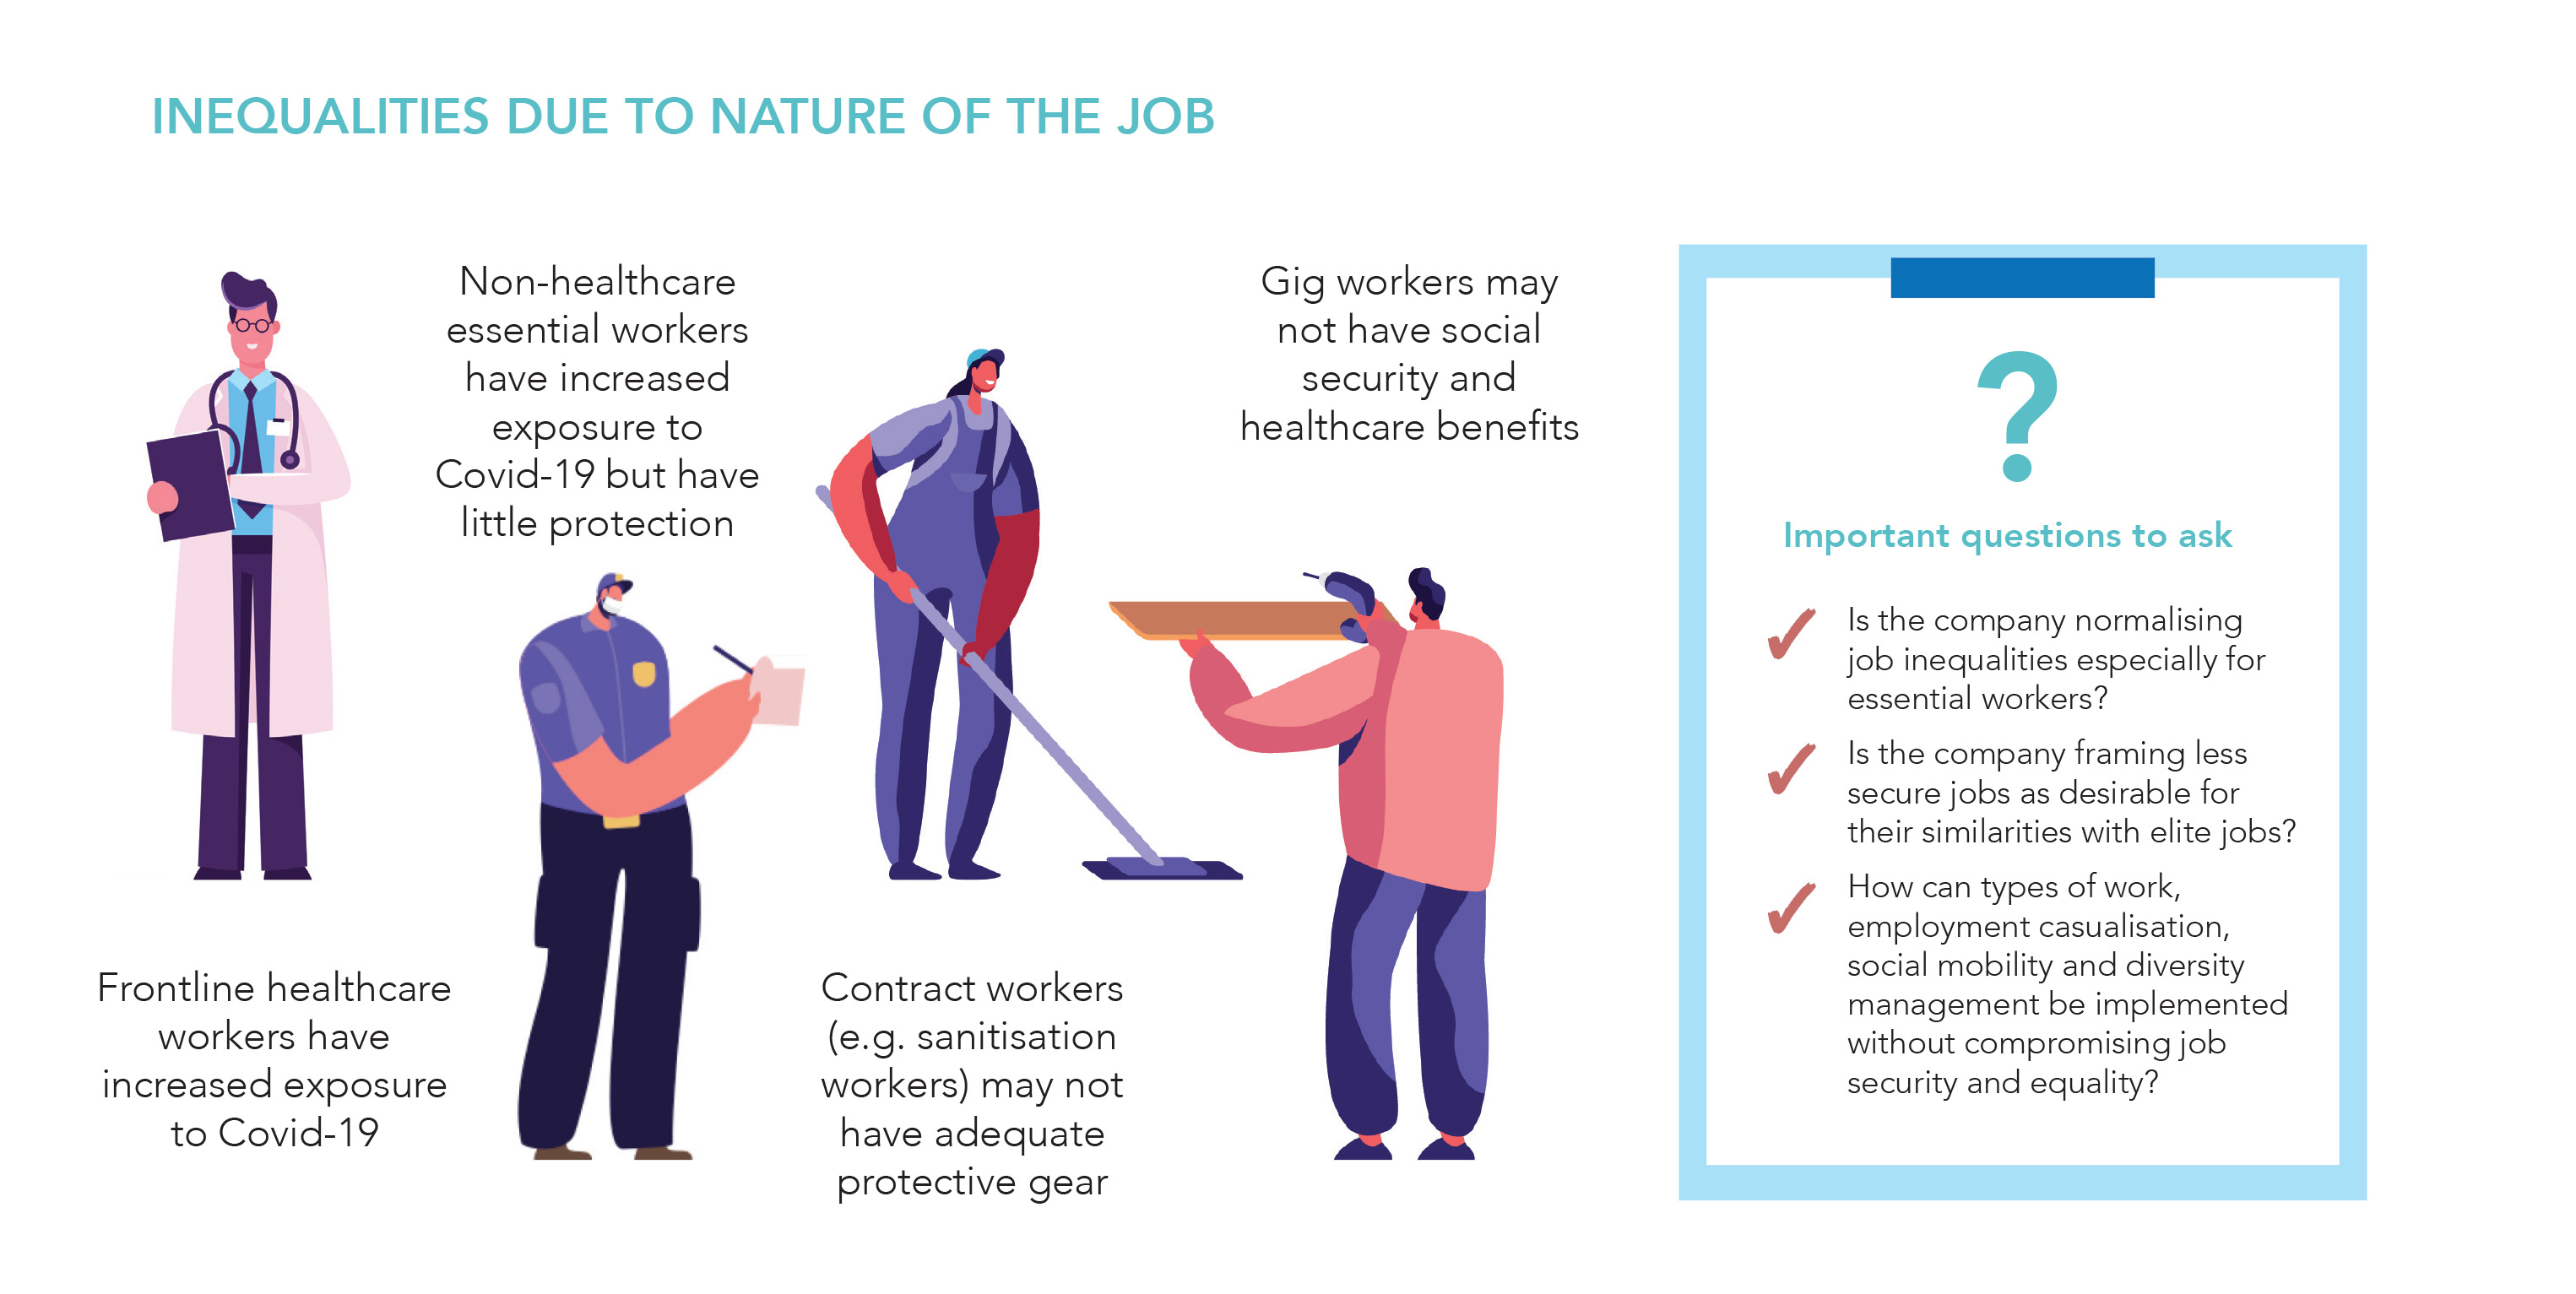 Inequalities due to nature of the job